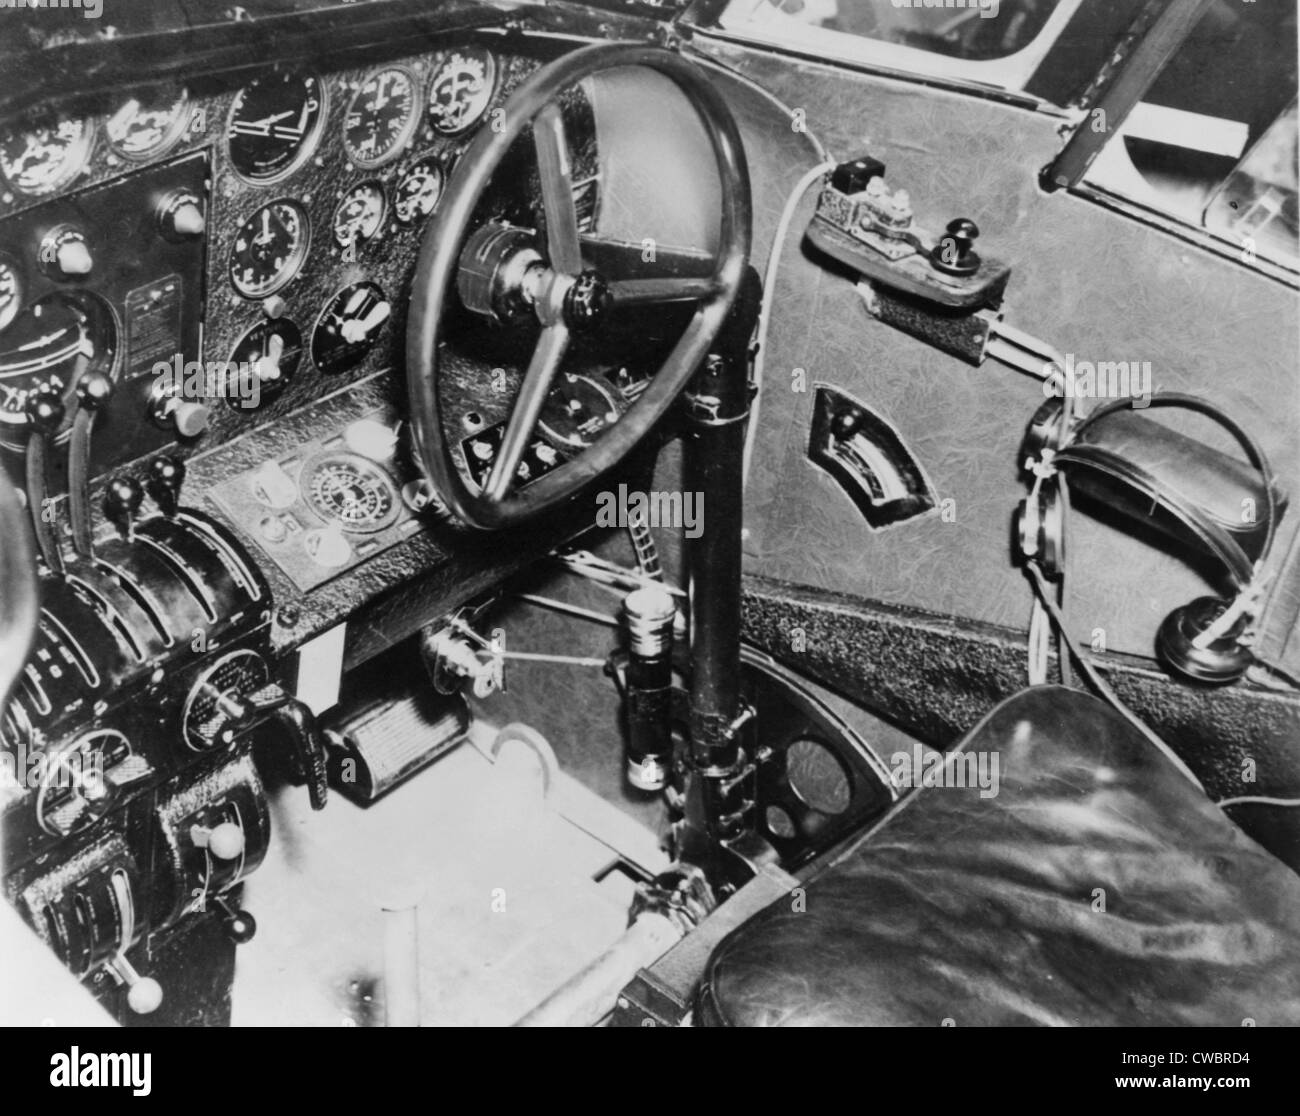 Cockpit of Amelia Earhart's plane, a Lockheed L-10E Electra, showing the transmitter key from which she transmitted an urgent Stock Photo